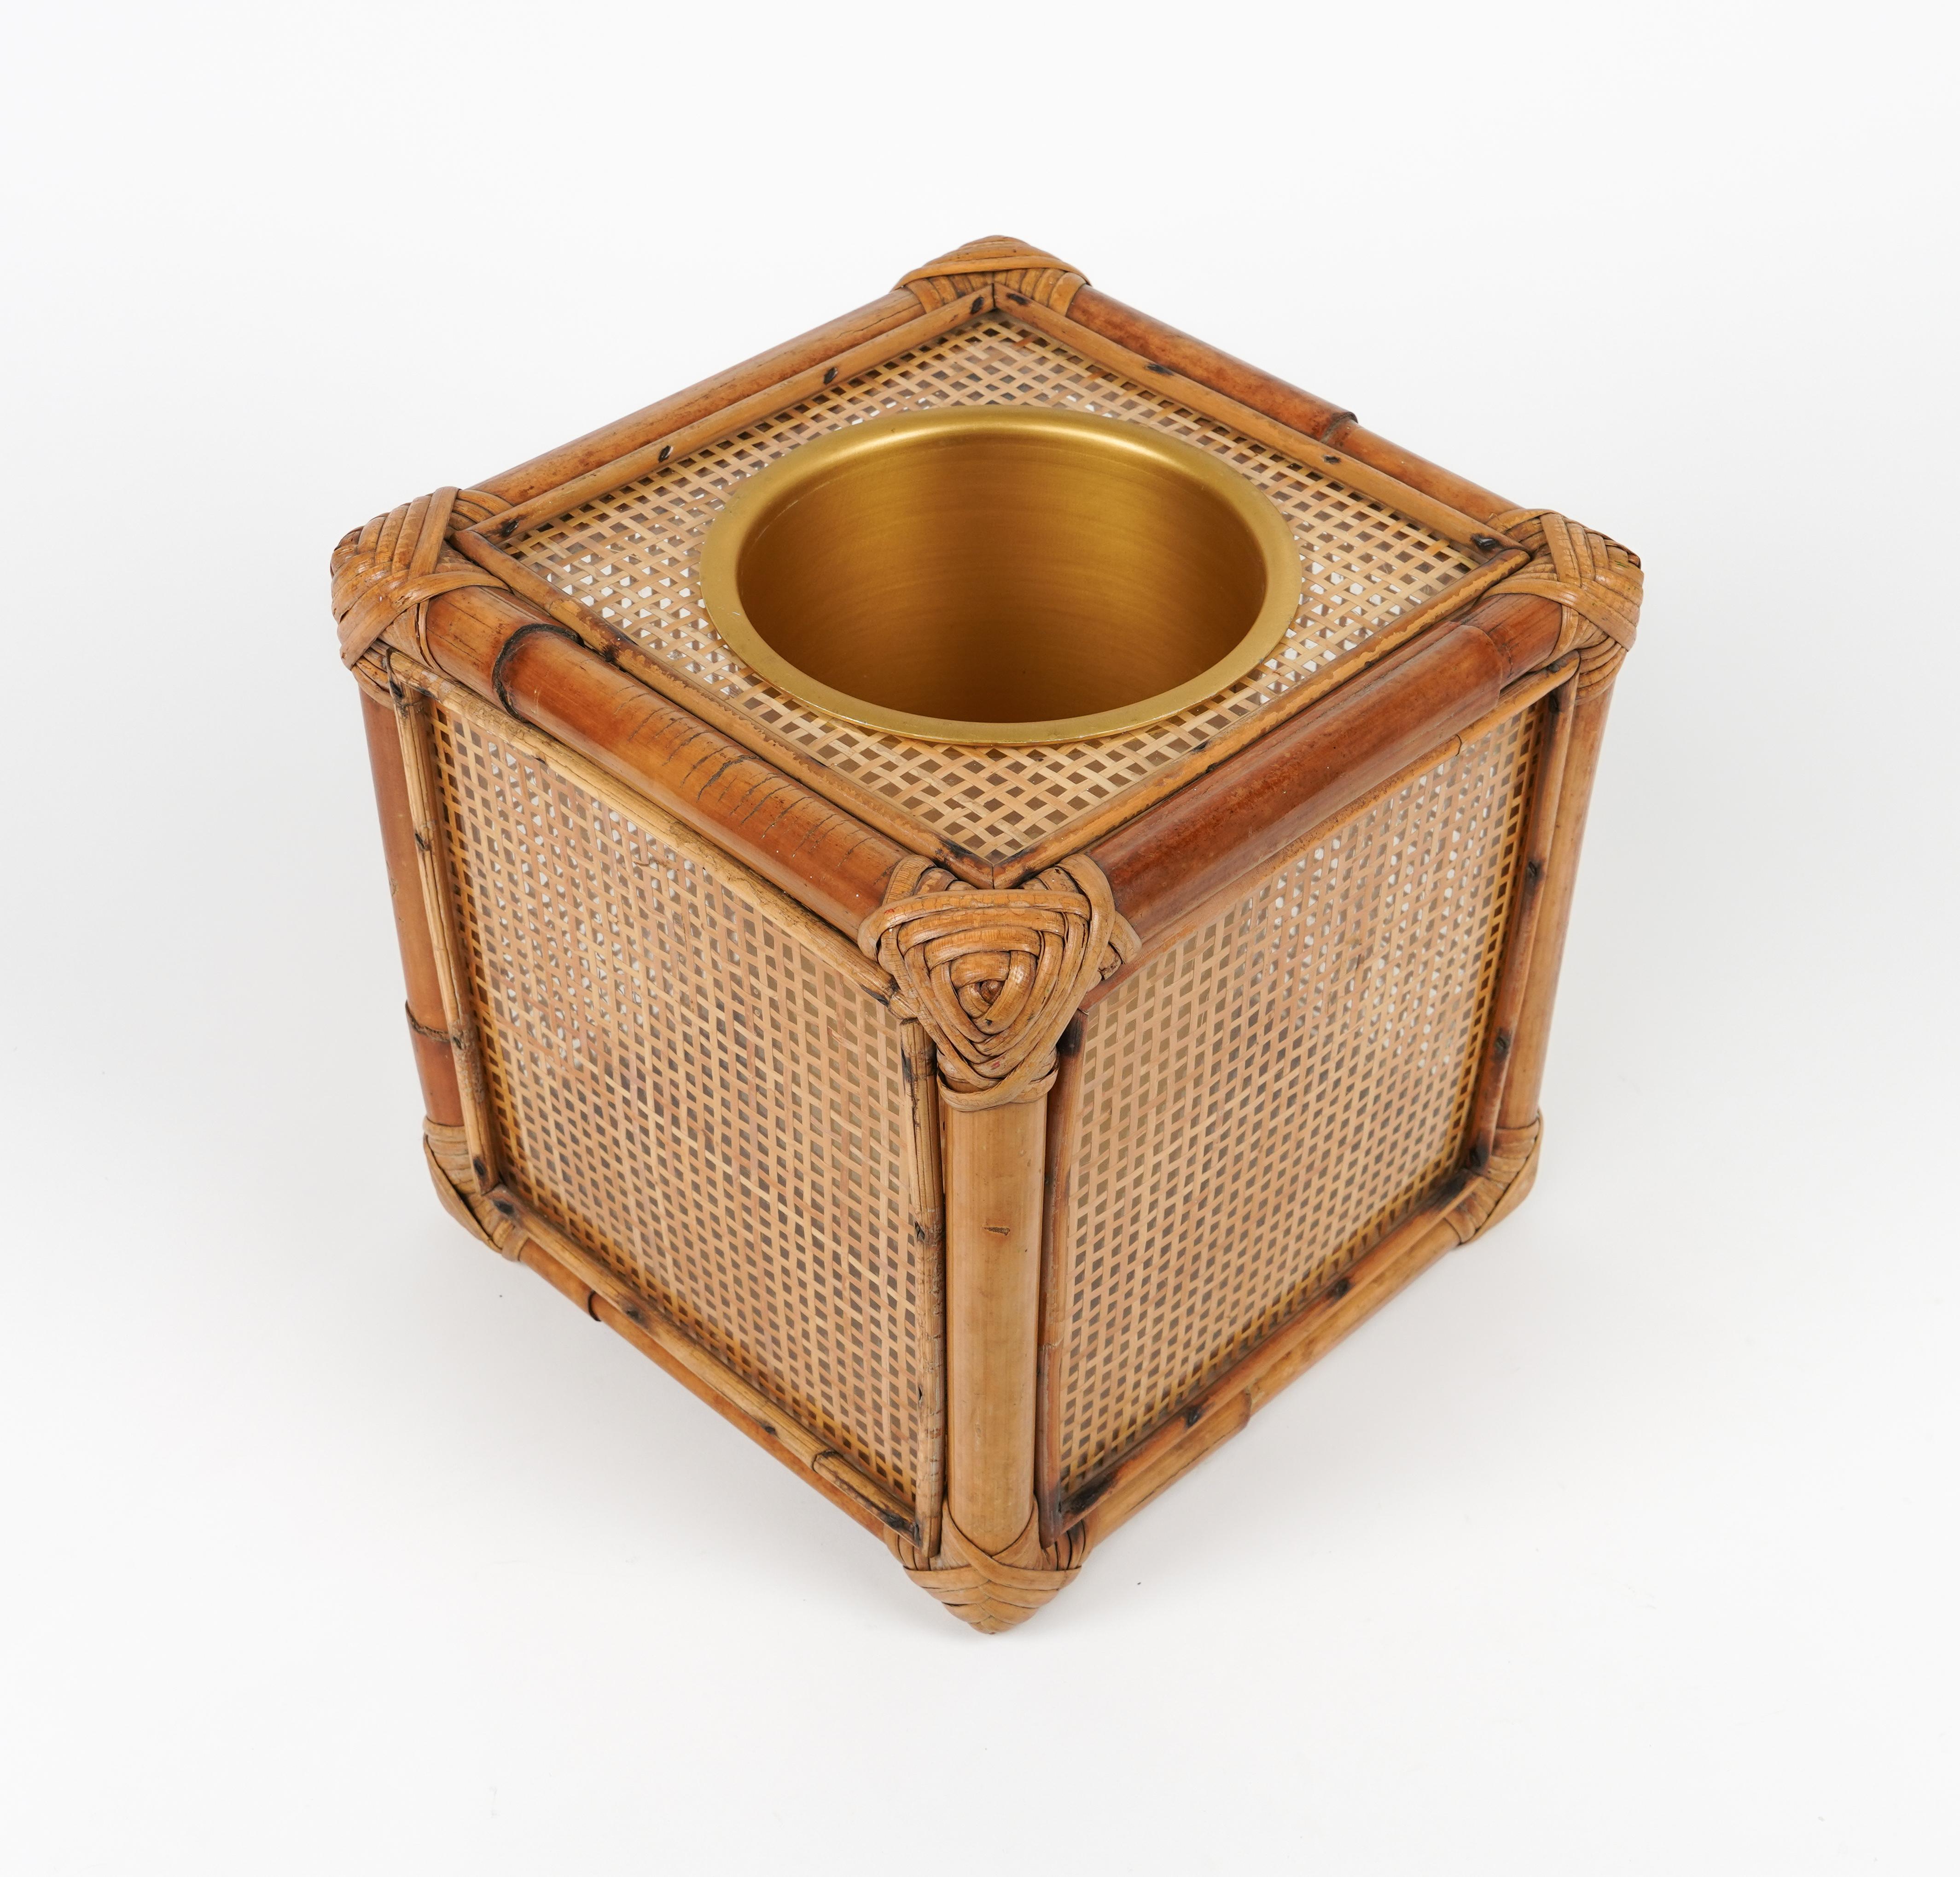 Ice Bucket in Bamboo, Rattan and Lucite Christian Dior Style, Italy 1970s For Sale 5